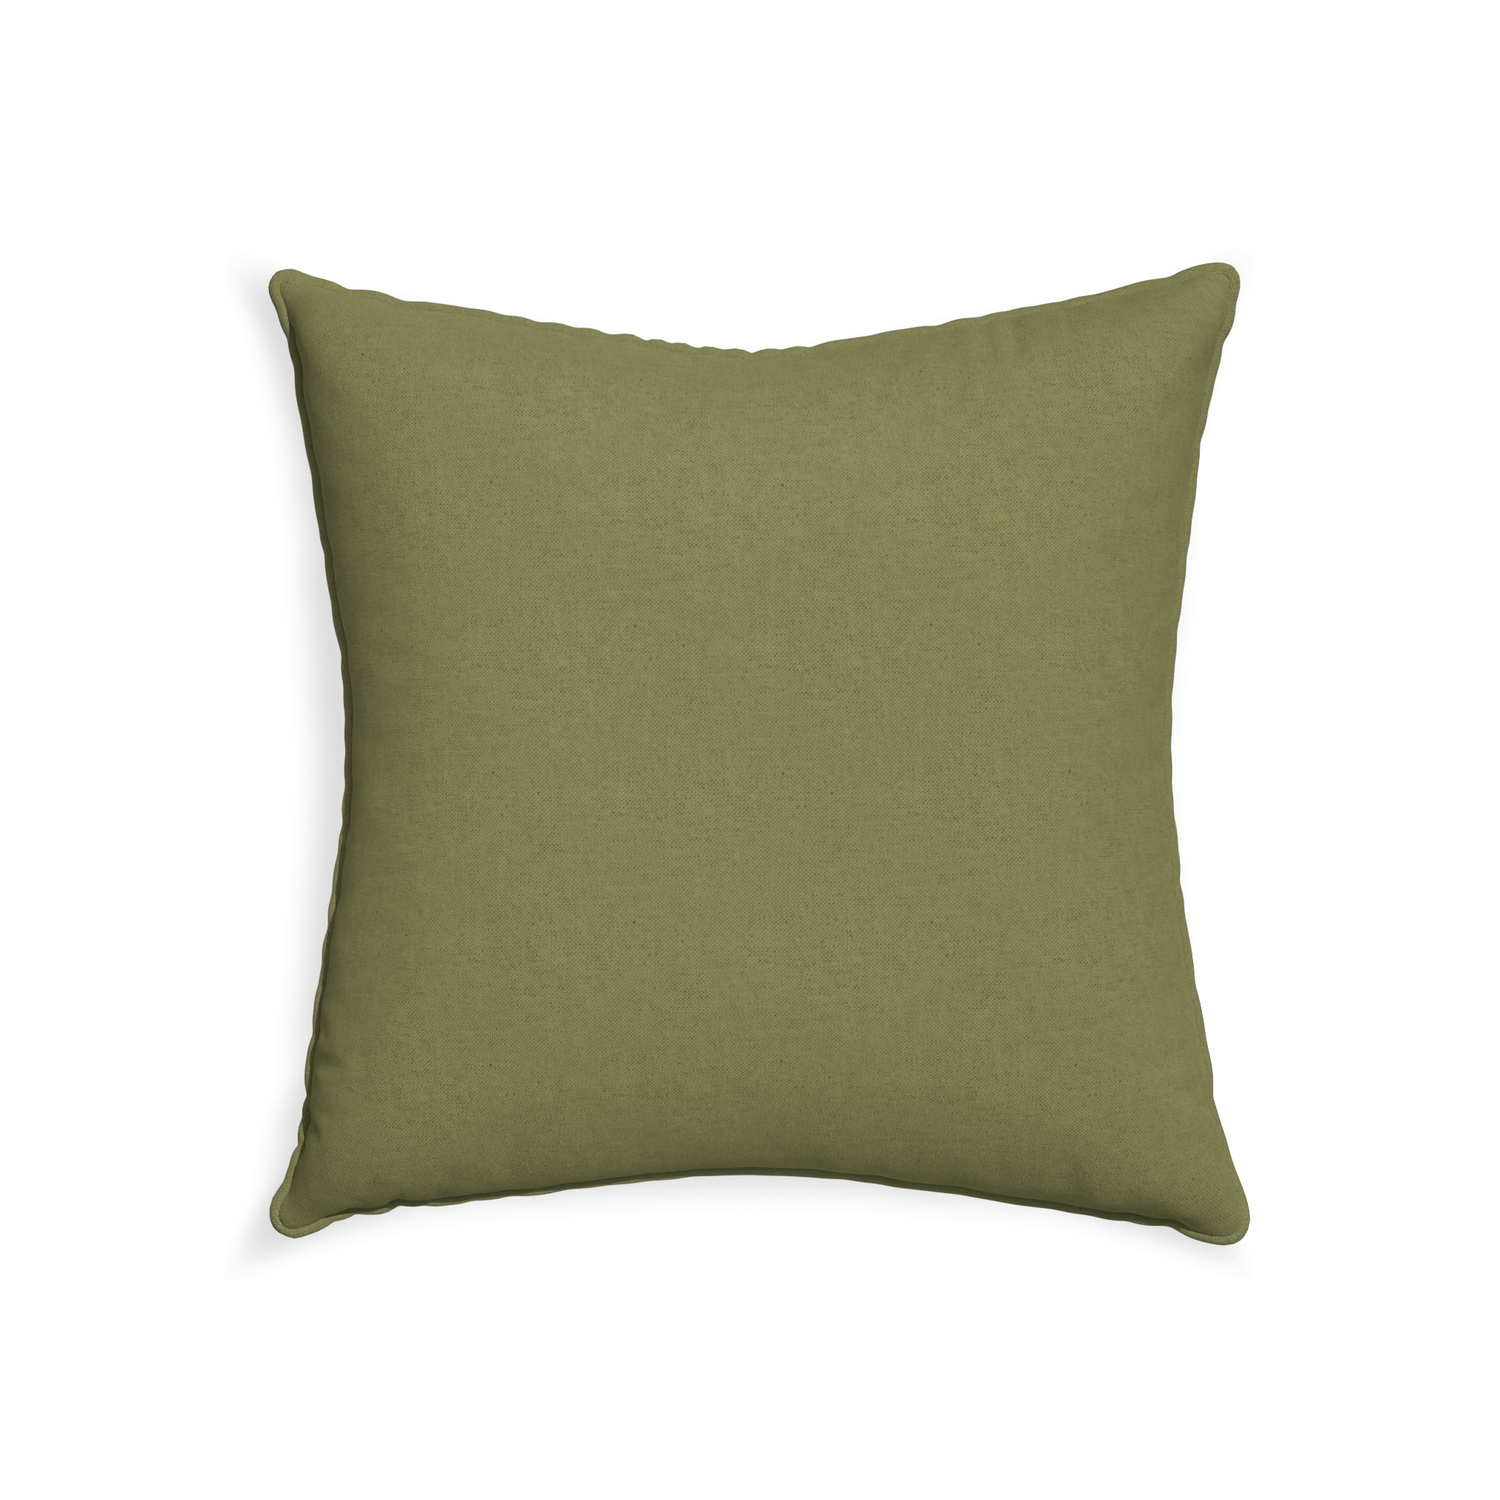 square moss green pillow with moss green piping